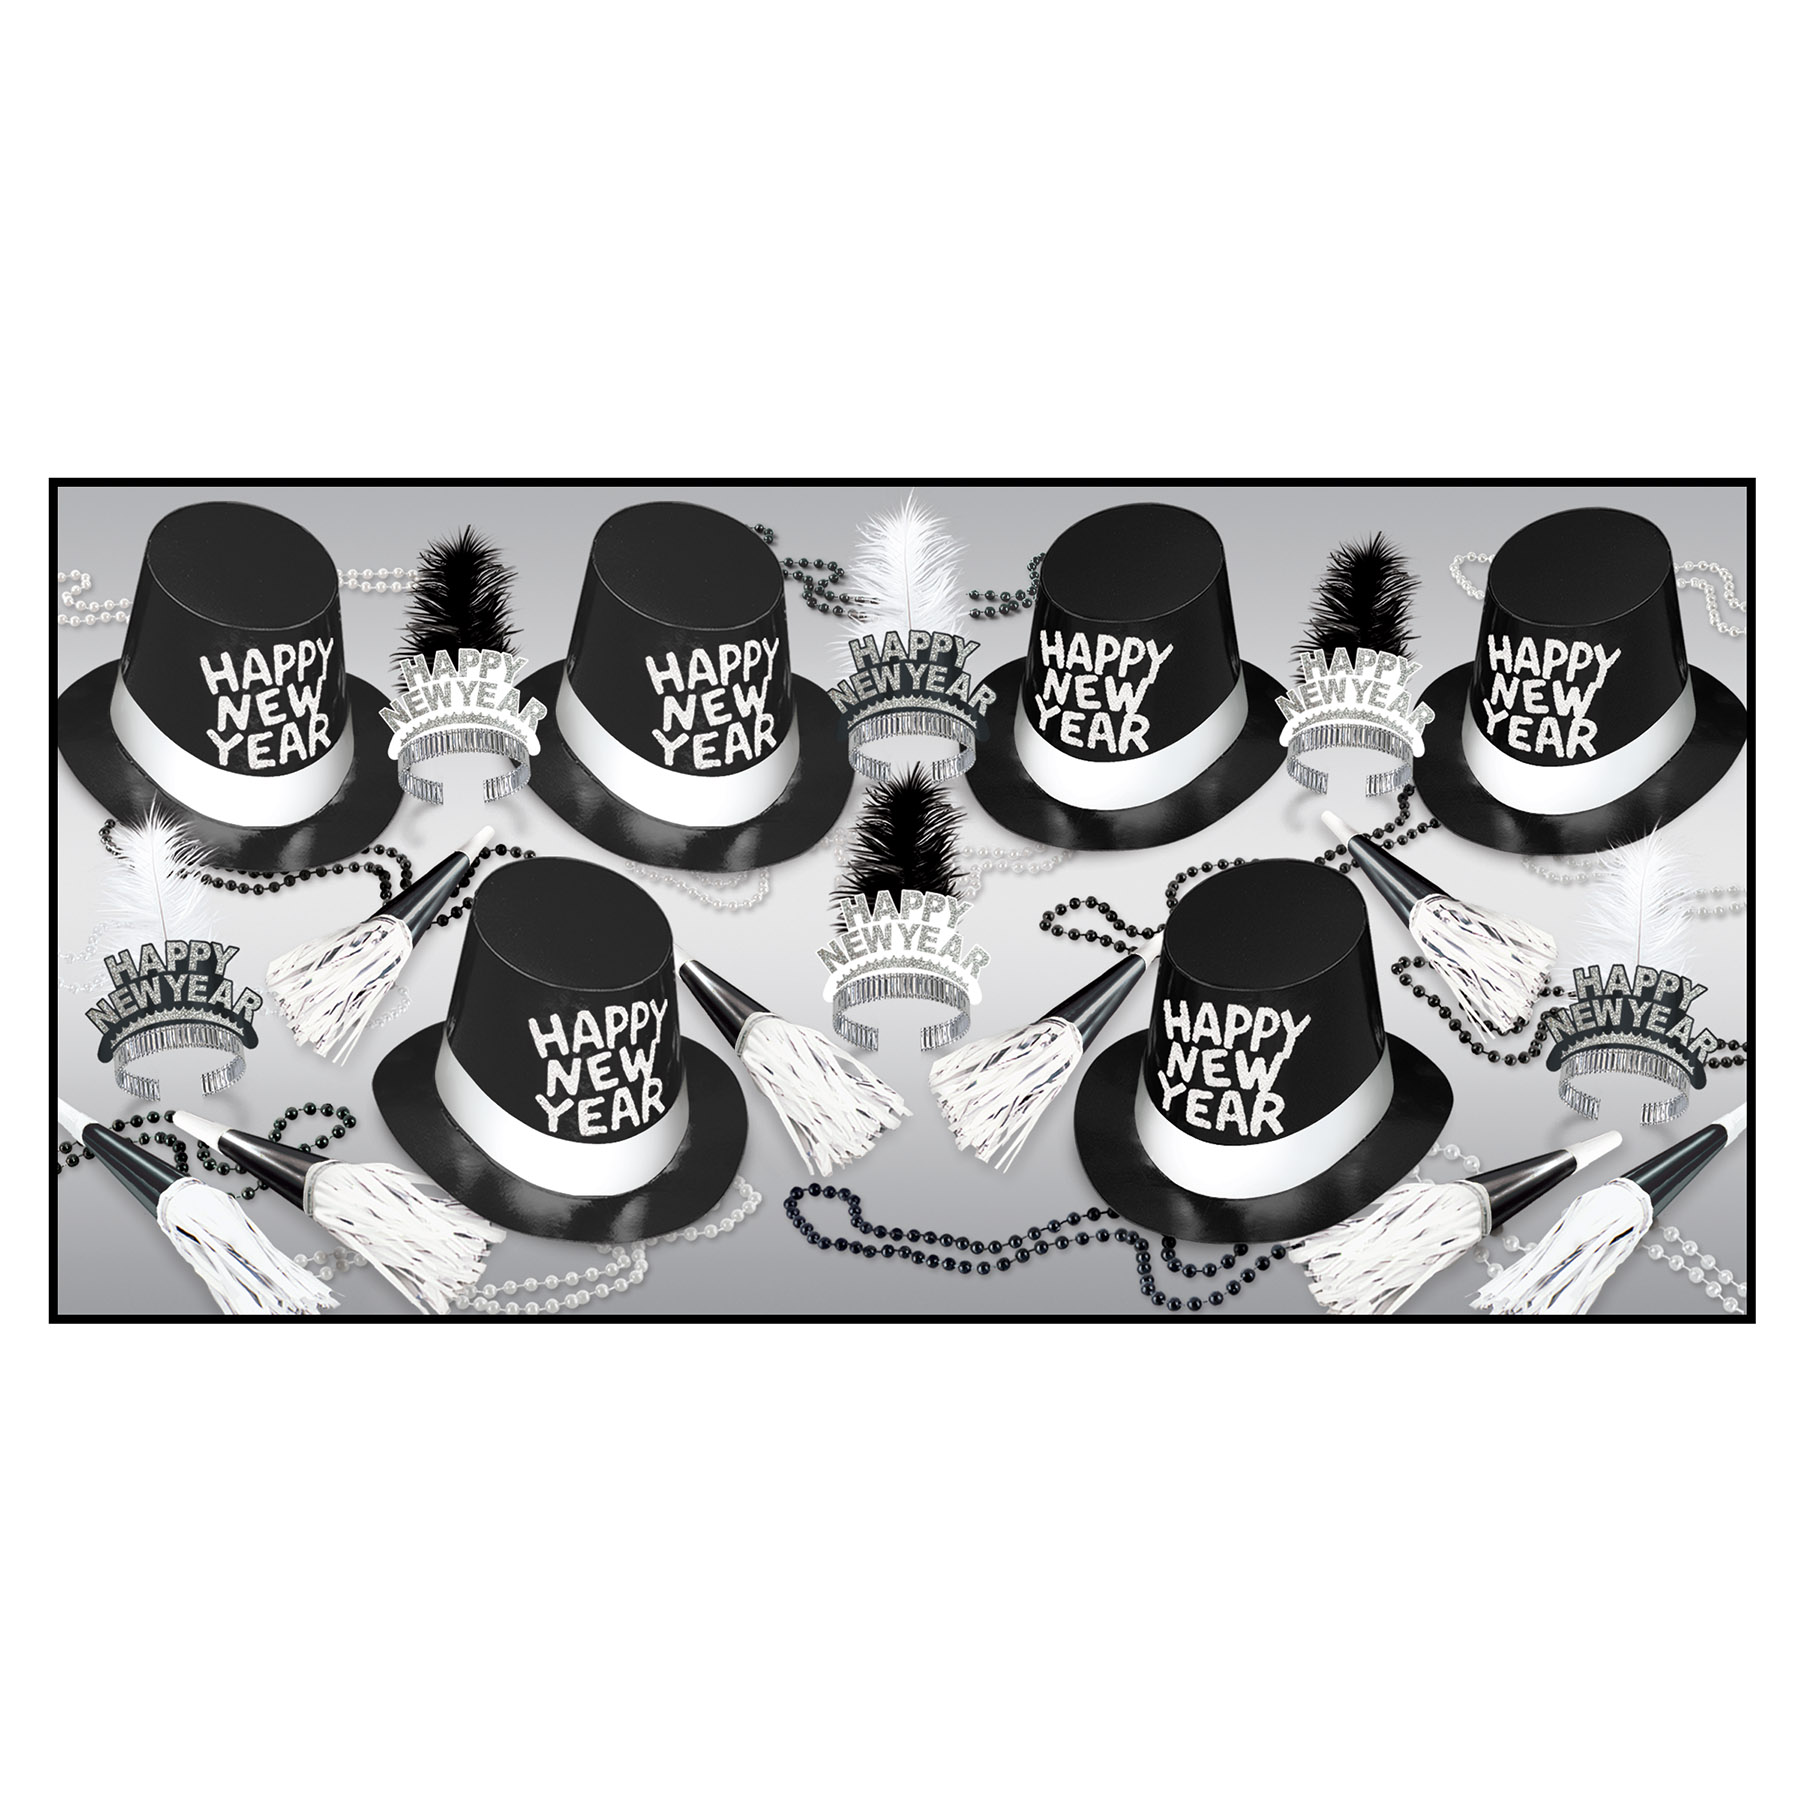 Top HATs & Tails Asst for 50